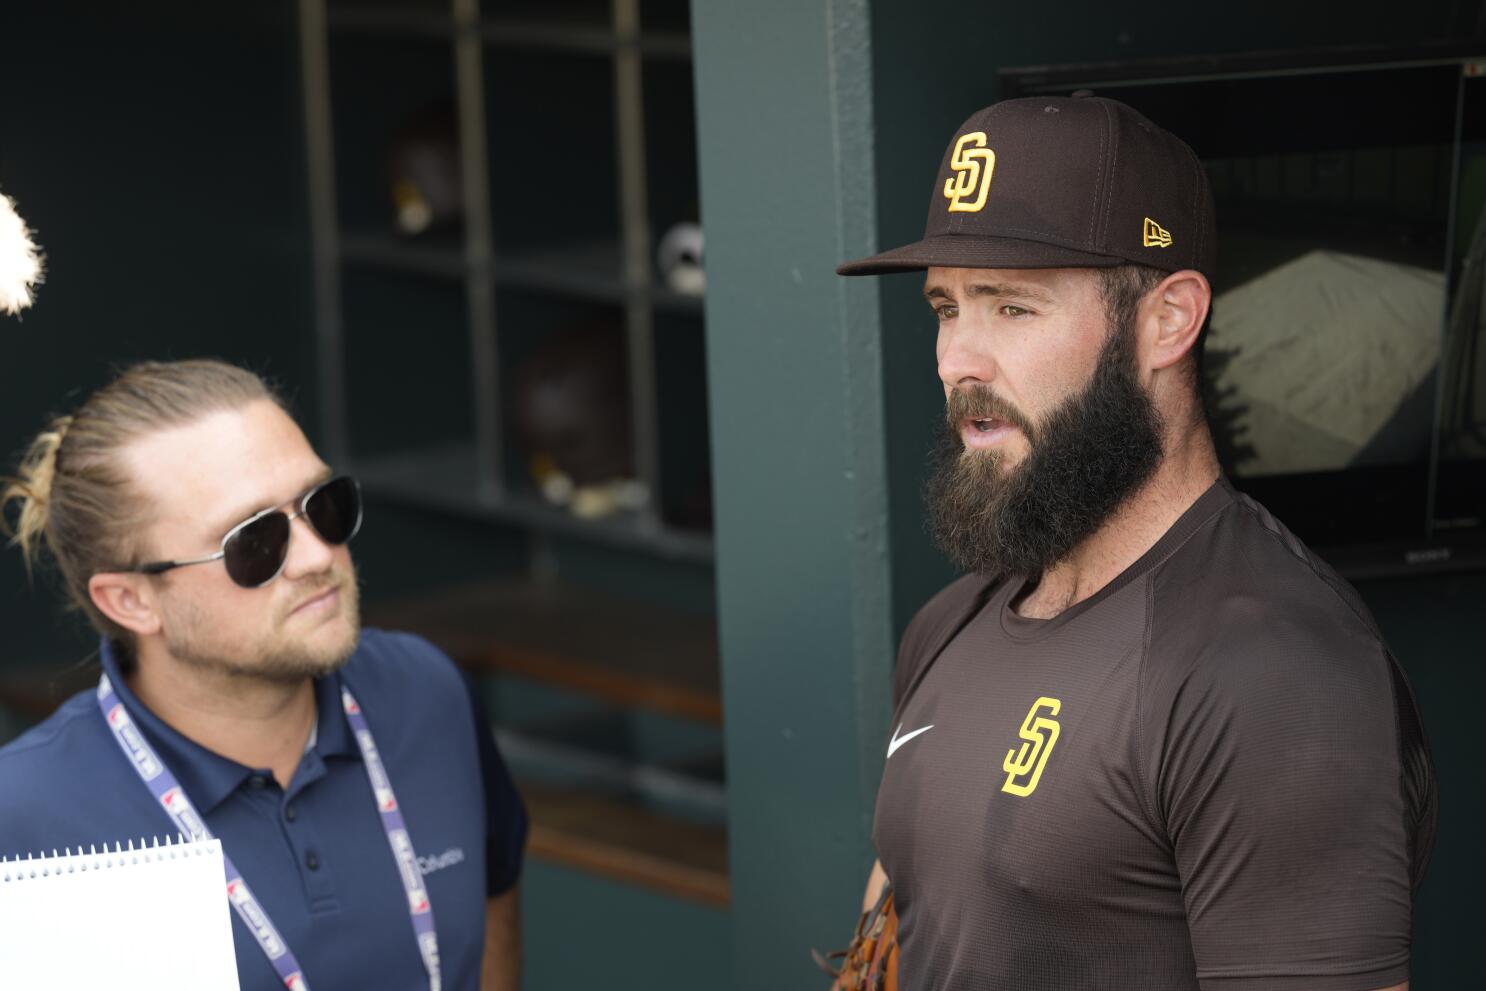 Padres sign Jake Arrieta: Former Cy Young winner lands in San